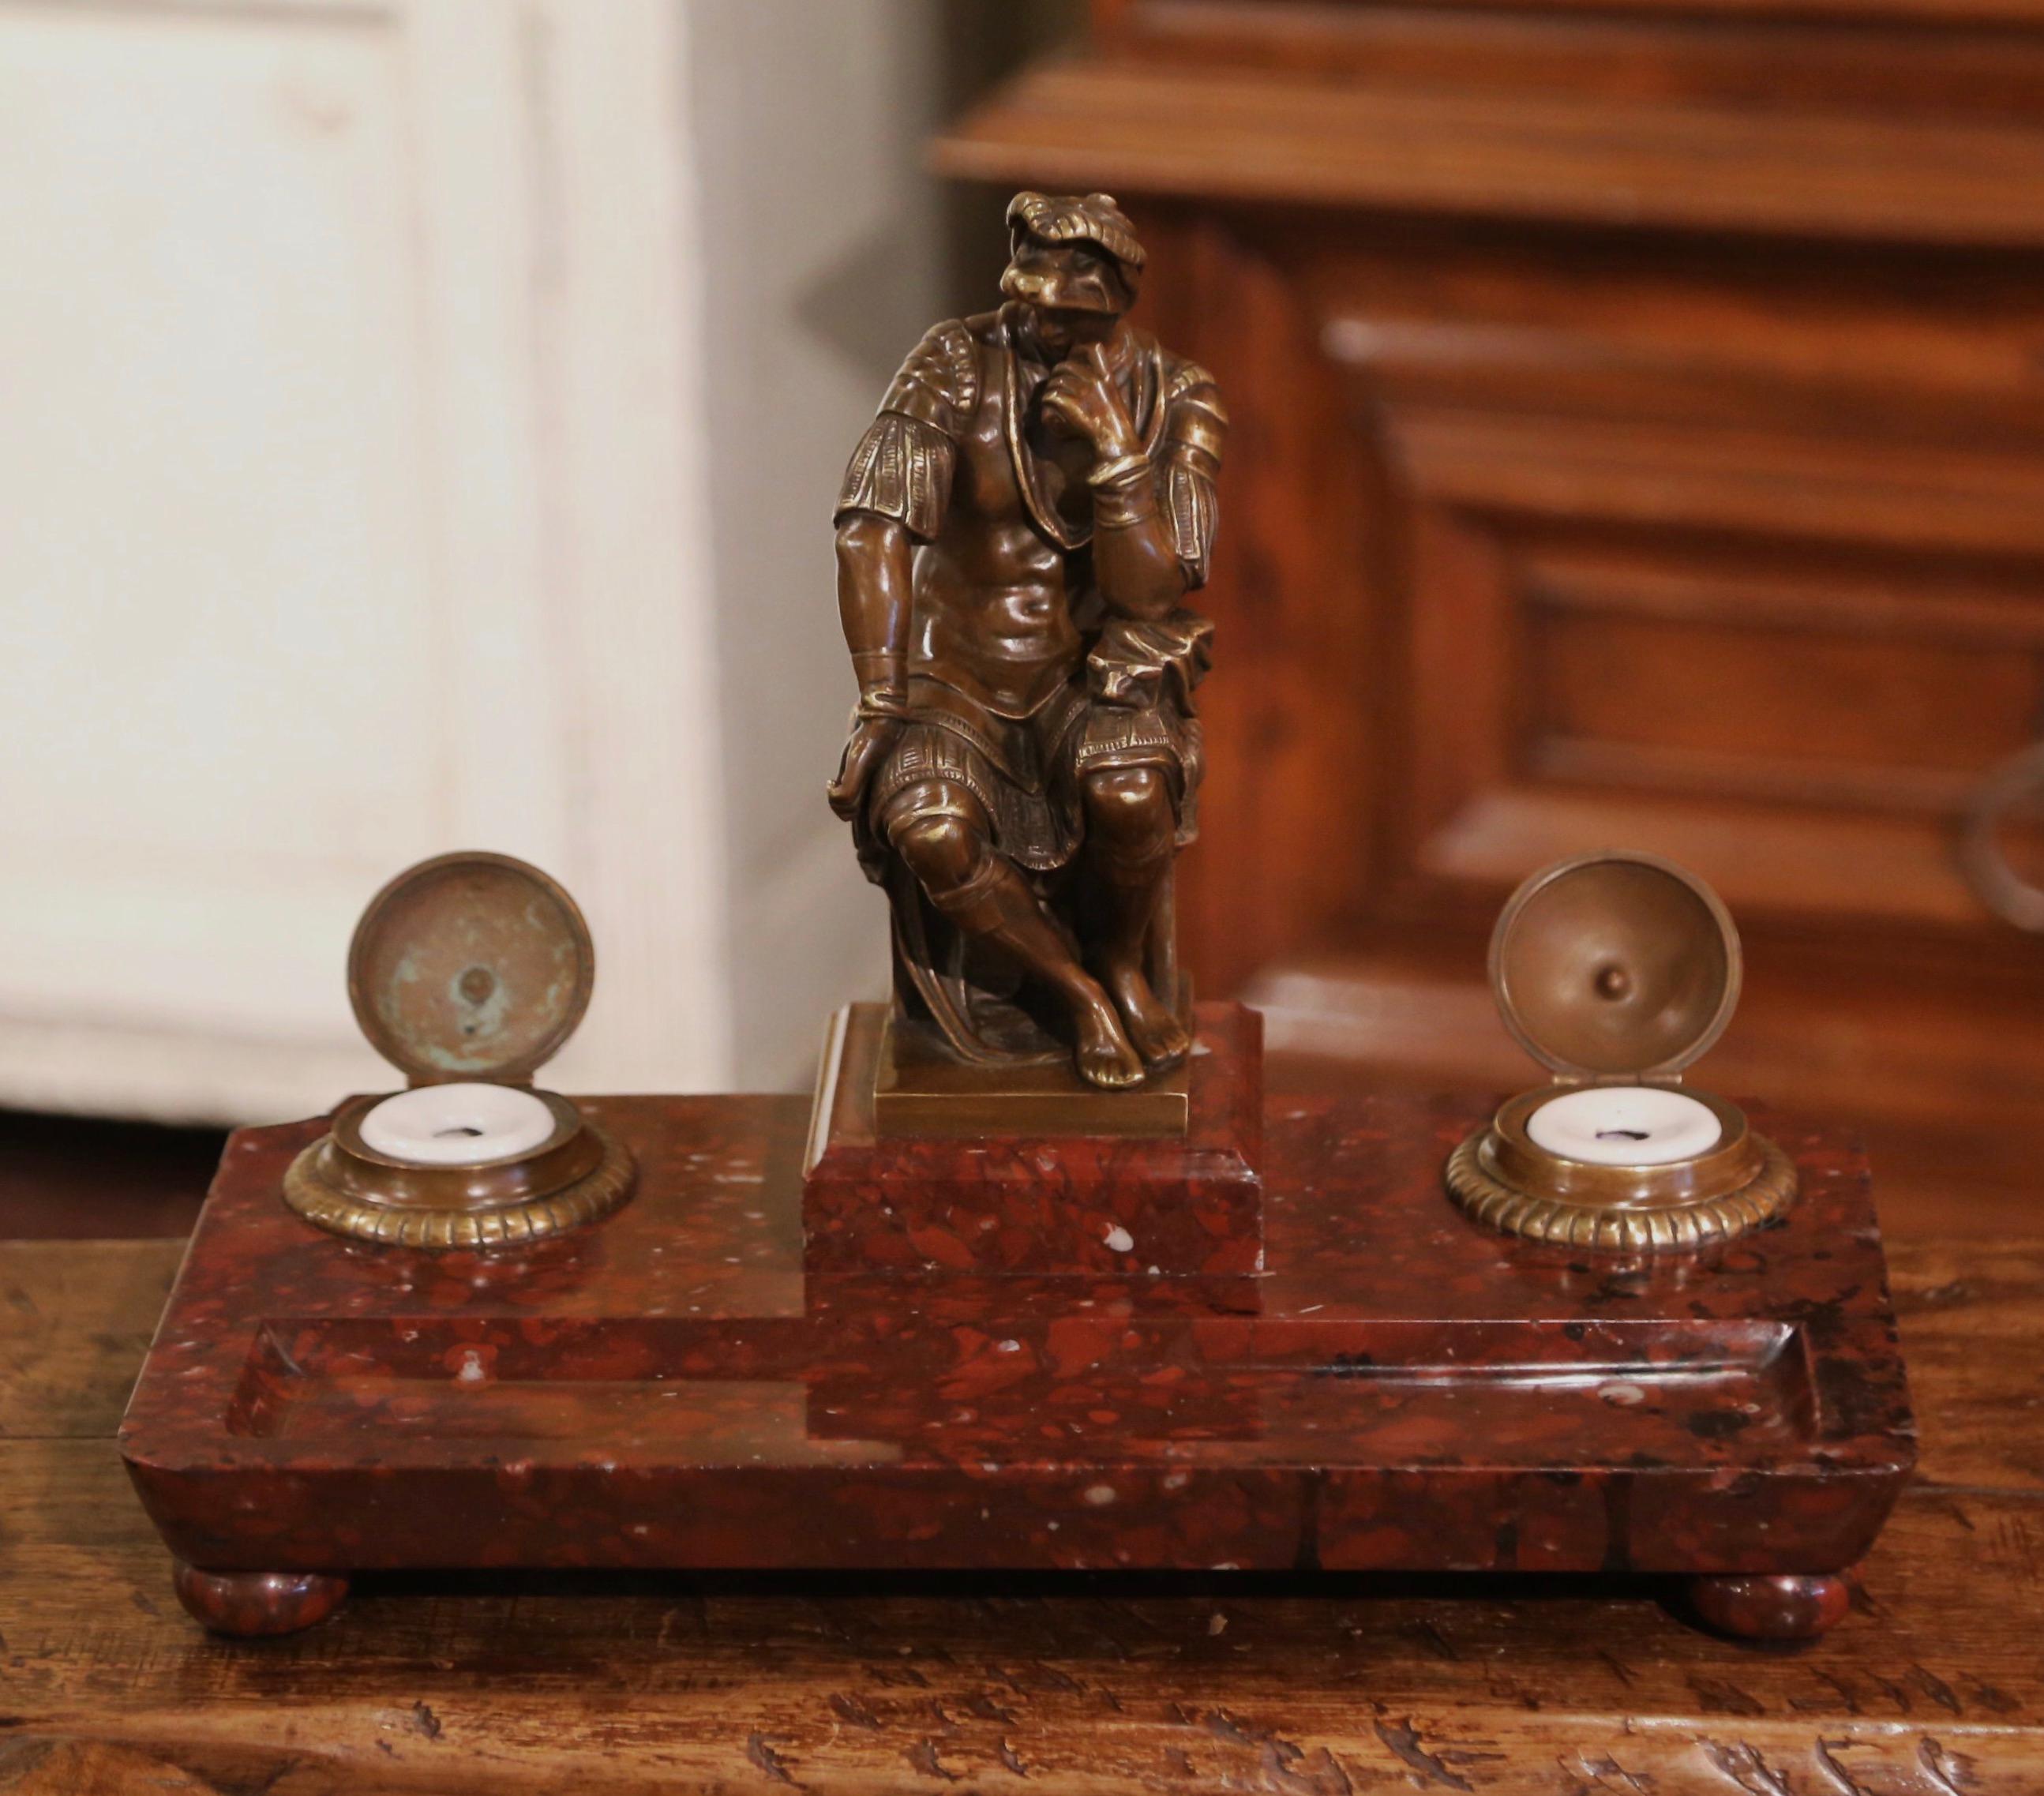 Decorate your office desk with this large Empire style inkwell. Created in France circa 1870 and rectangular in shape, the inkwell features a bronze Roman soldier in the center sitting on a stool. On either side of the figure, are two bronze